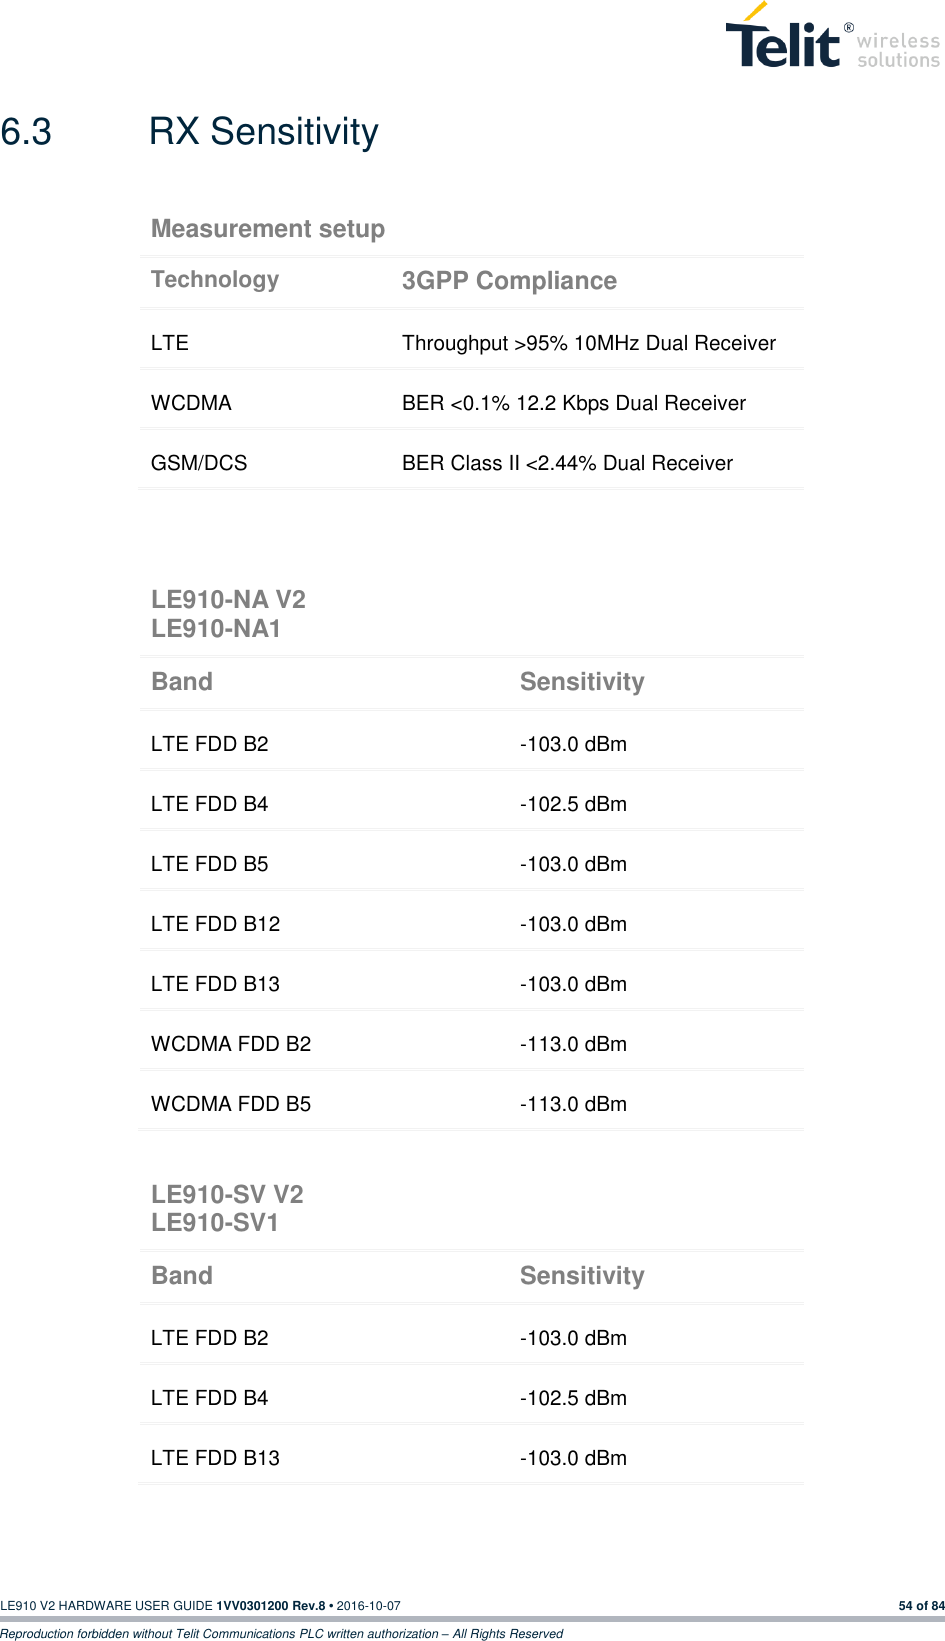   LE910 V2 HARDWARE USER GUIDE 1VV0301200 Rev.8 • 2016-10-07 54 of 84 Reproduction forbidden without Telit Communications PLC written authorization – All Rights Reserved 6.3  RX Sensitivity                            LE910-NA V2 LE910-NA1 Band Sensitivity LTE FDD B2 -103.0 dBm LTE FDD B4 -102.5 dBm LTE FDD B5 -103.0 dBm LTE FDD B12 -103.0 dBm LTE FDD B13 -103.0 dBm WCDMA FDD B2 -113.0 dBm WCDMA FDD B5 -113.0 dBm Measurement setup Technology 3GPP Compliance LTE Throughput &gt;95% 10MHz Dual Receiver WCDMA BER &lt;0.1% 12.2 Kbps Dual Receiver GSM/DCS BER Class II &lt;2.44% Dual Receiver LE910-SV V2 LE910-SV1 Band Sensitivity LTE FDD B2 -103.0 dBm LTE FDD B4 -102.5 dBm LTE FDD B13 -103.0 dBm 